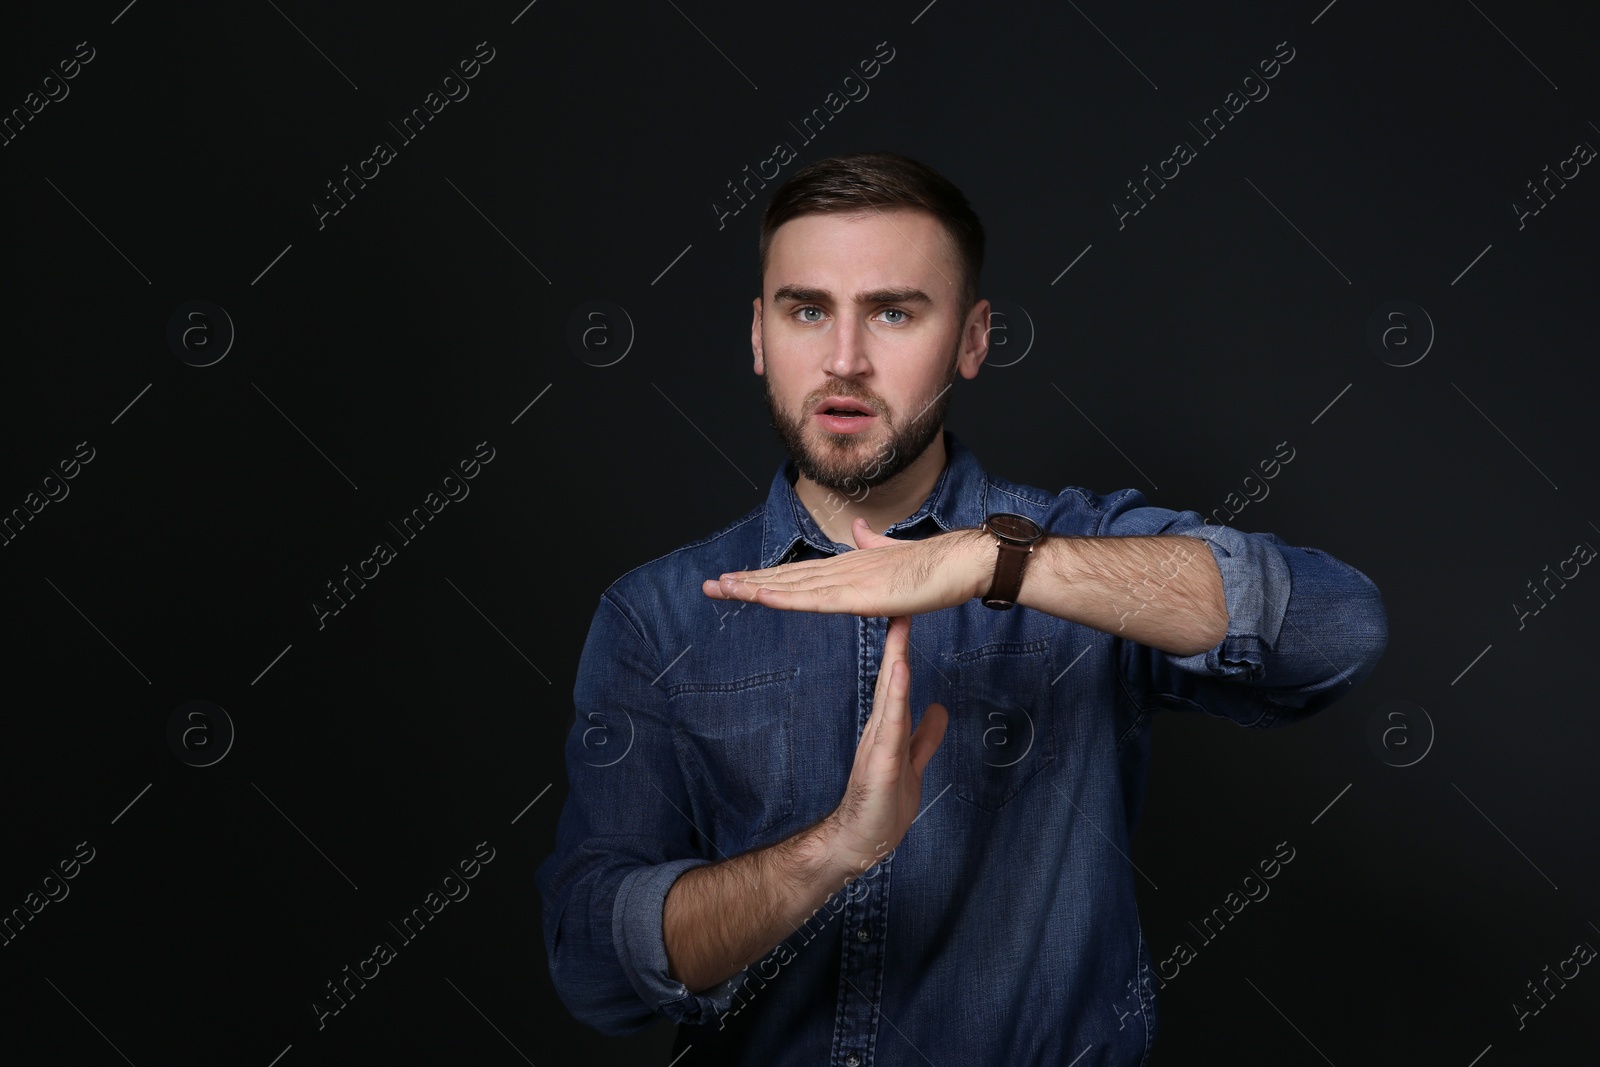 Photo of Man showing TIME OUT gesture in sign language on black background